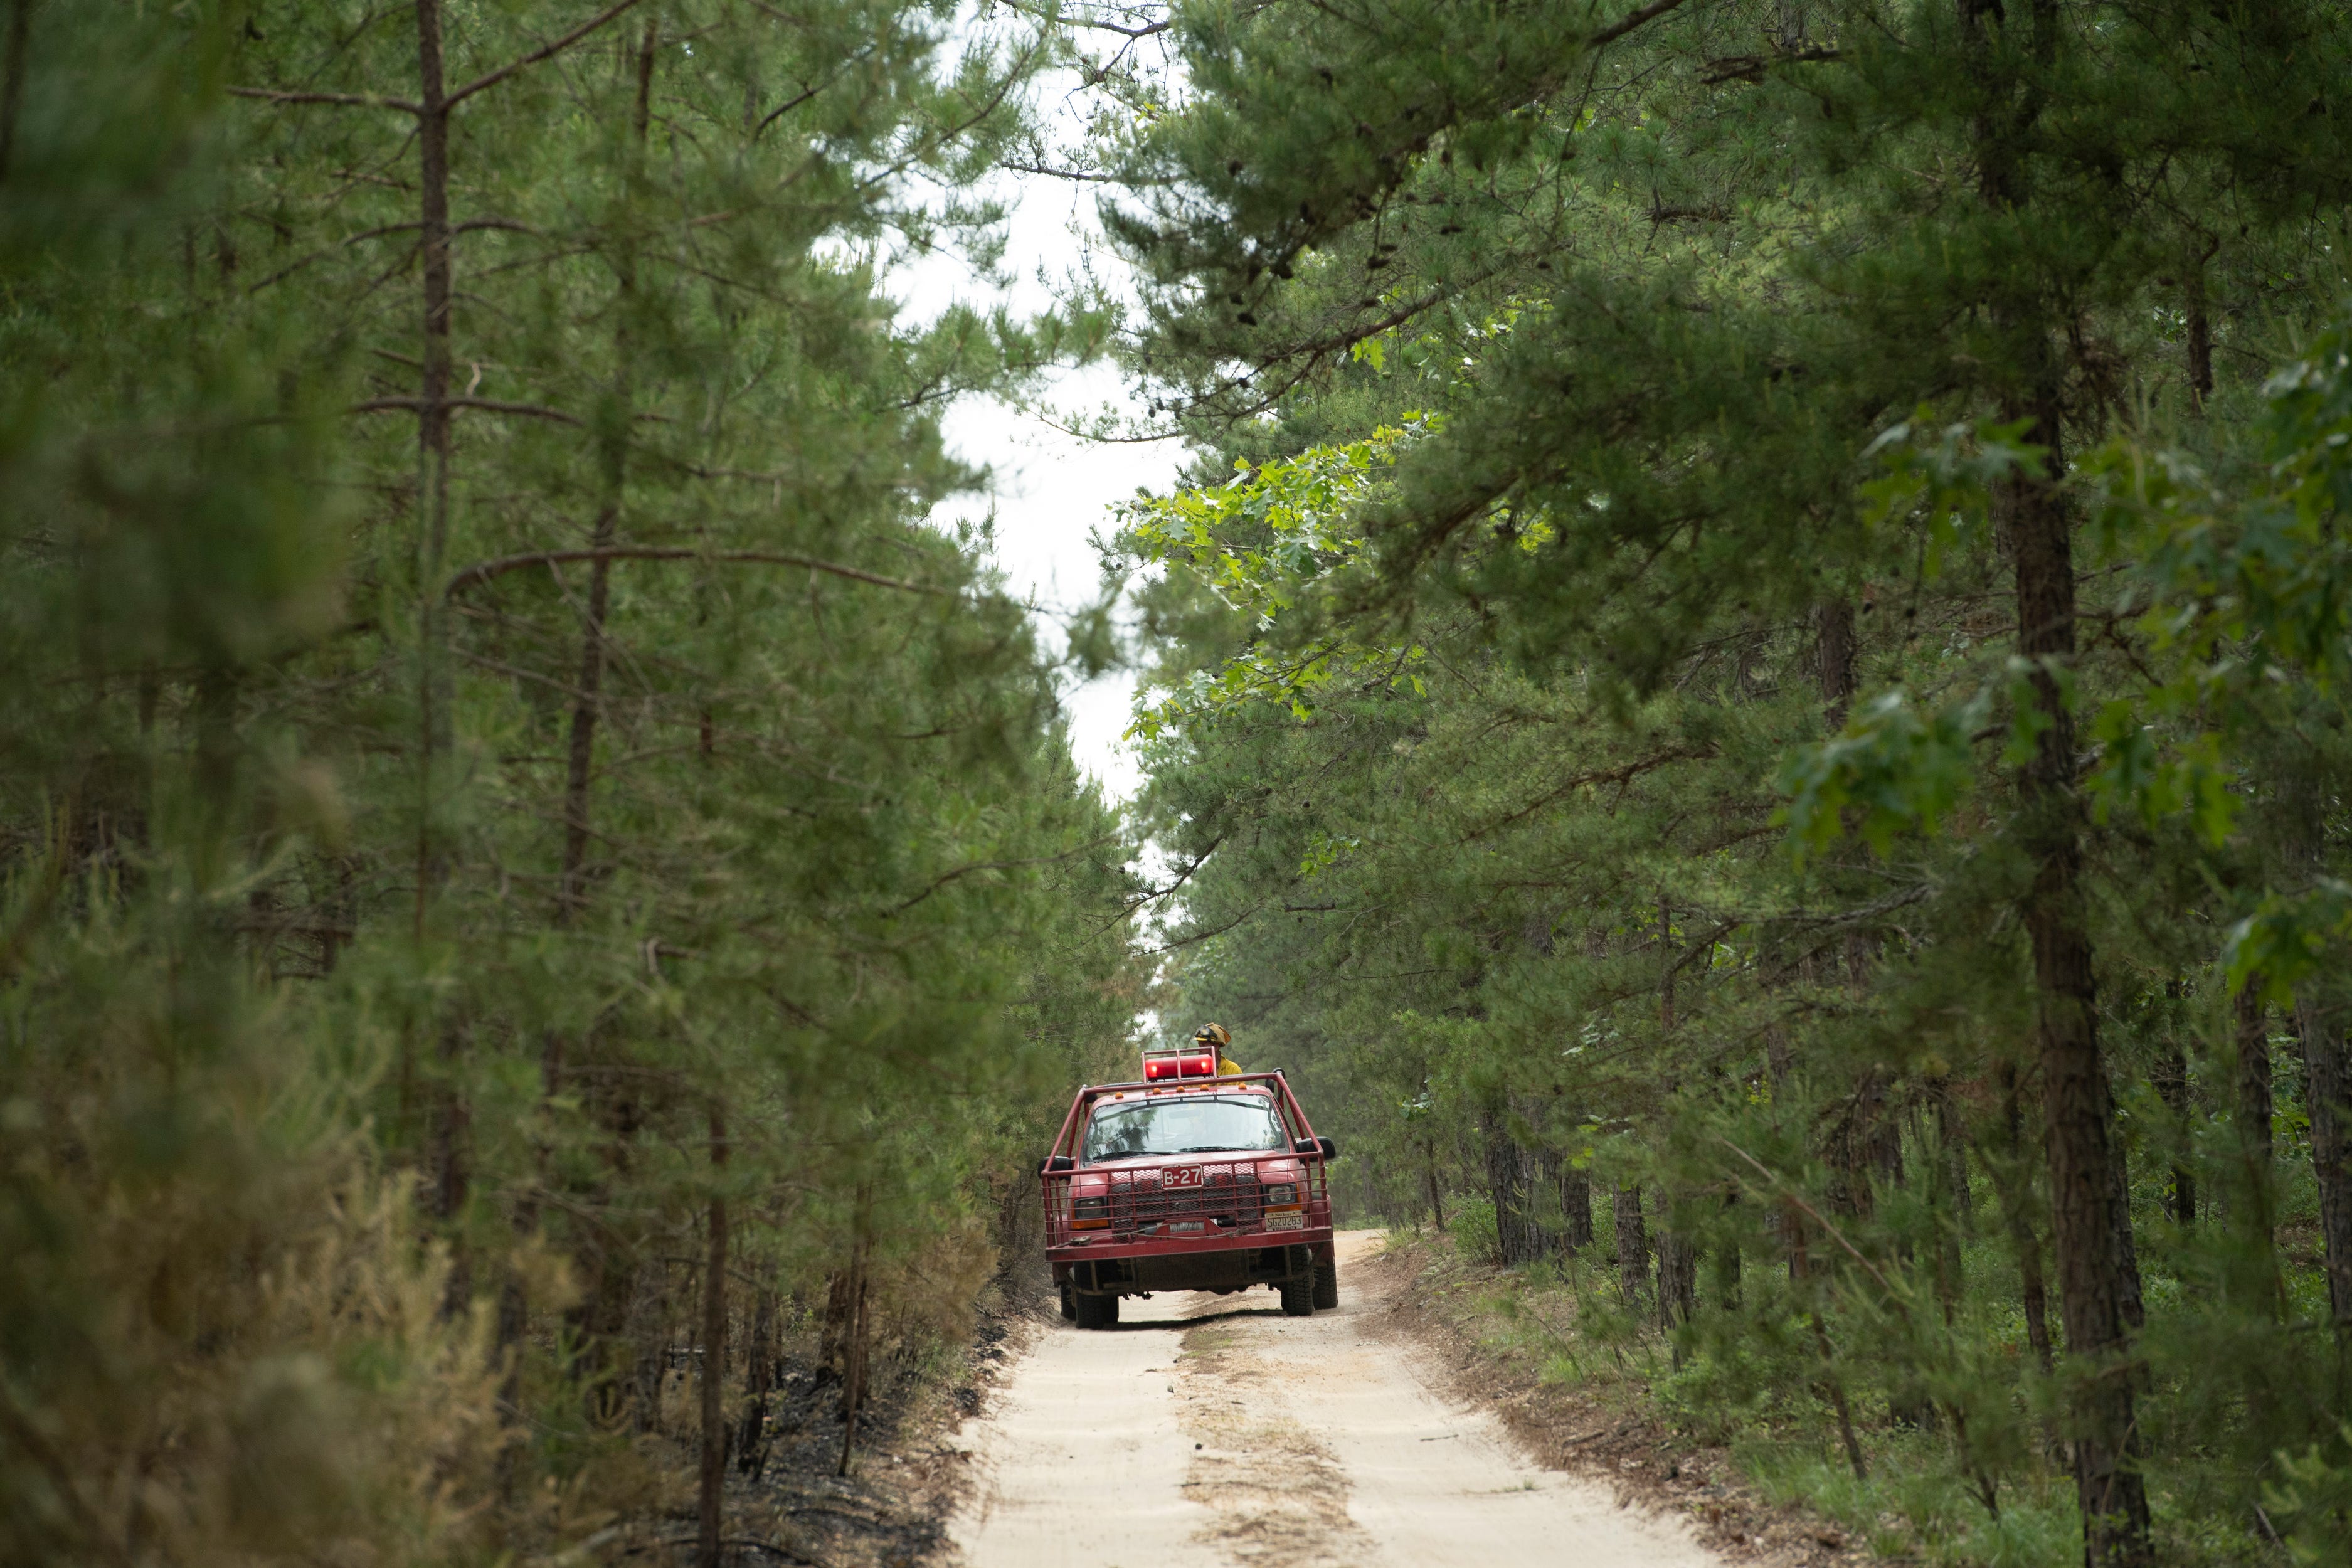 wharton state forest plan to control illegal motor vehicle damage is a welcome step